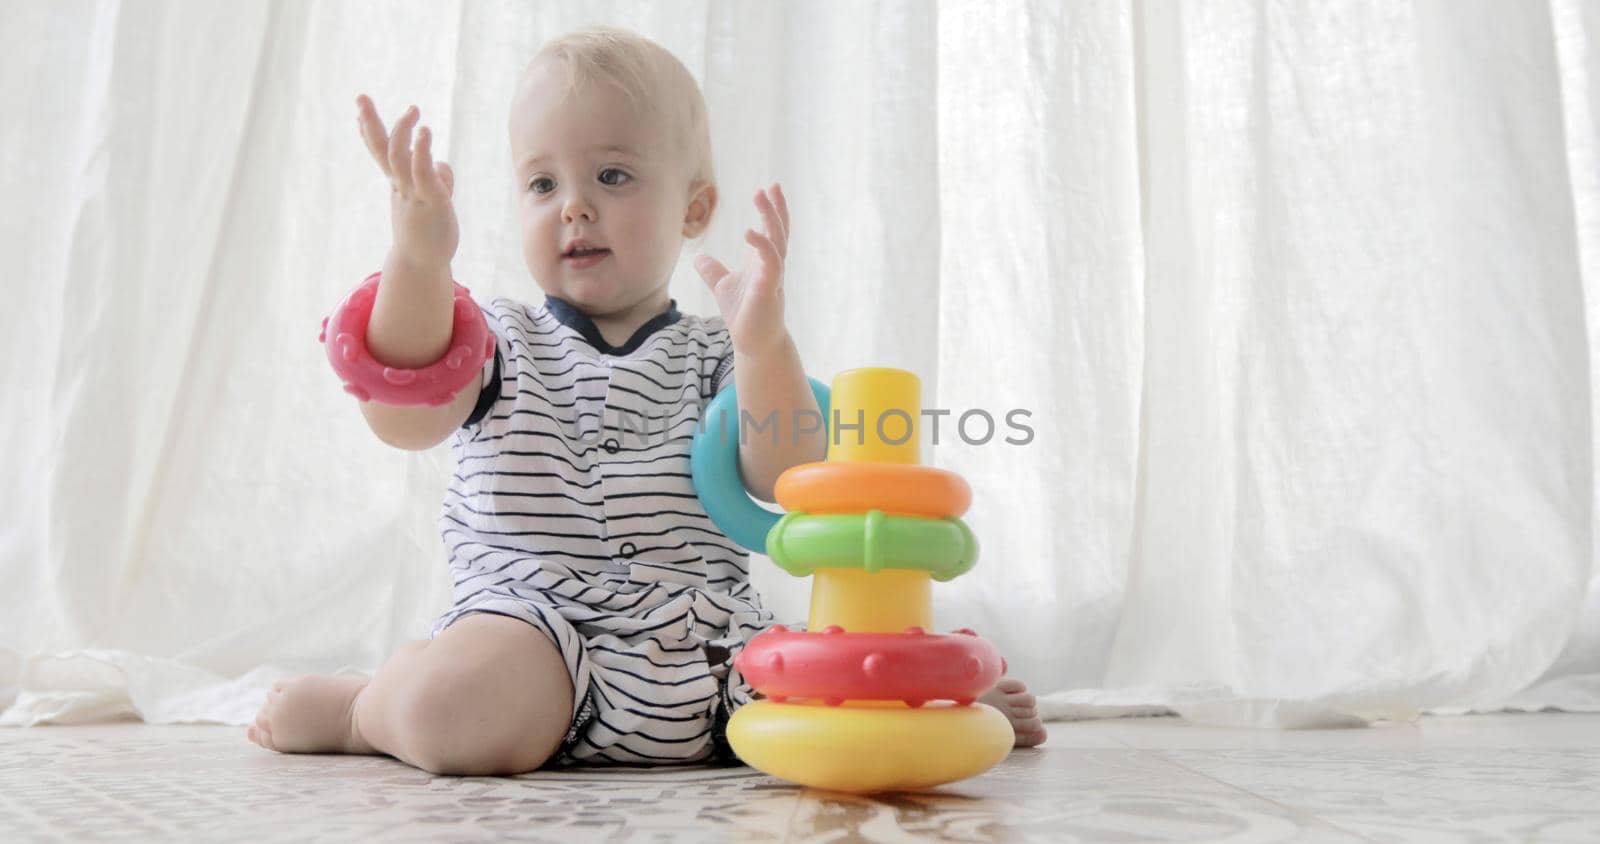 Adorable baby playing with toys by Demkat